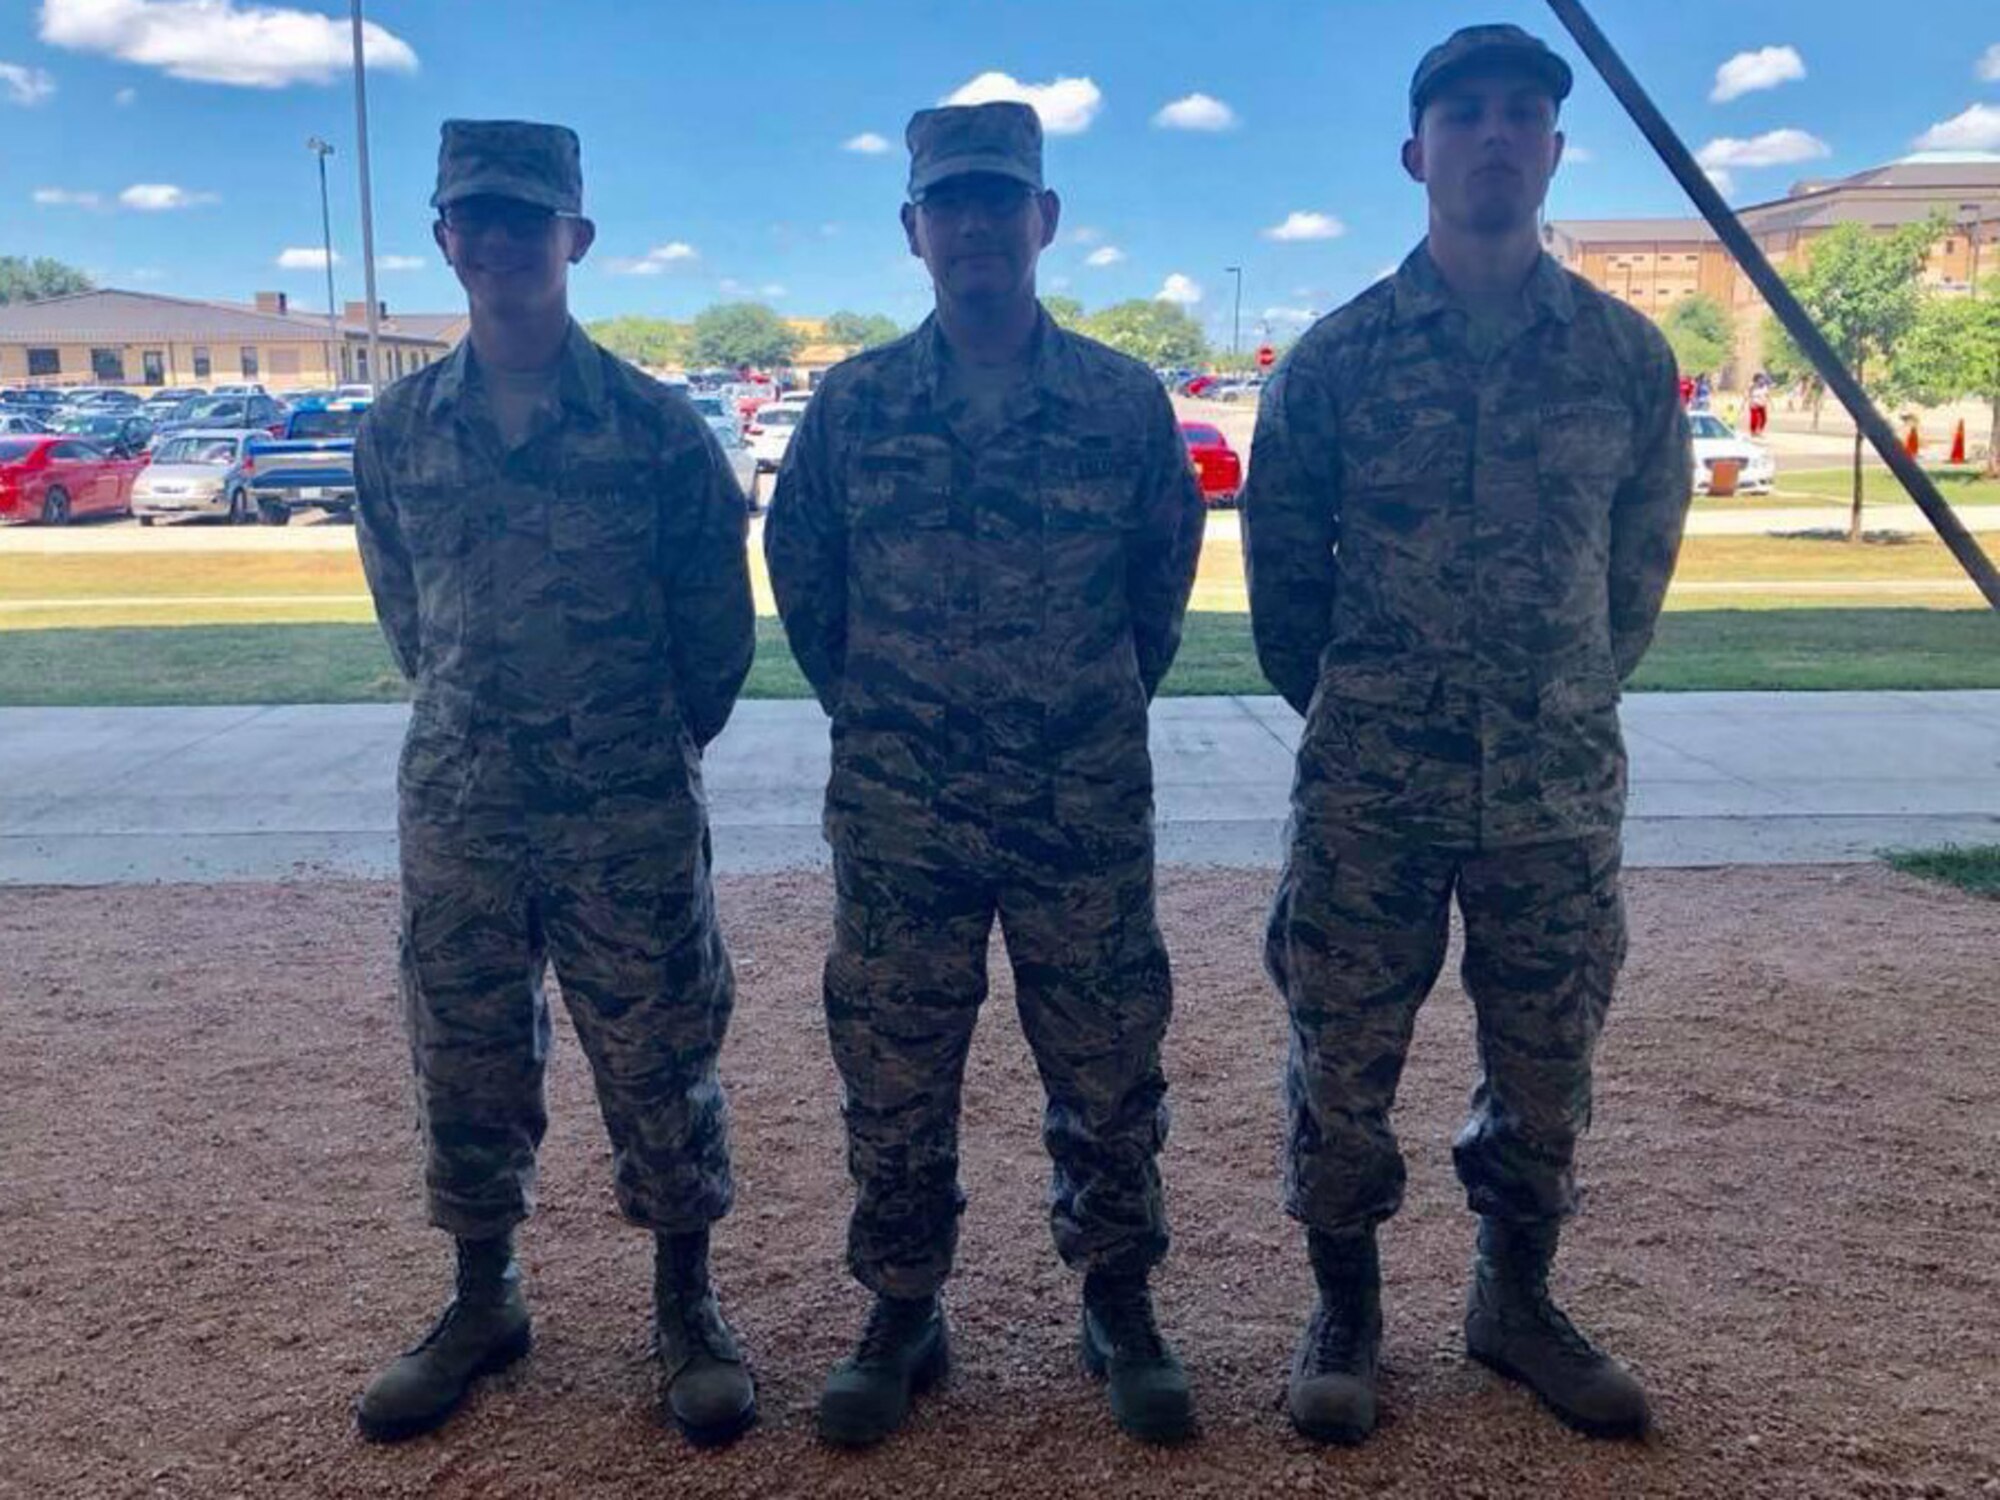 From left, then U.S. Airman Basic Dylan Pickering, along with his father, then Airman 1st Class Orin Pickering and his brother then Senior Airman Jacob Beebe, pose for a photo at Joint Base San Antonio-Lackland, Texas, in June 2018.